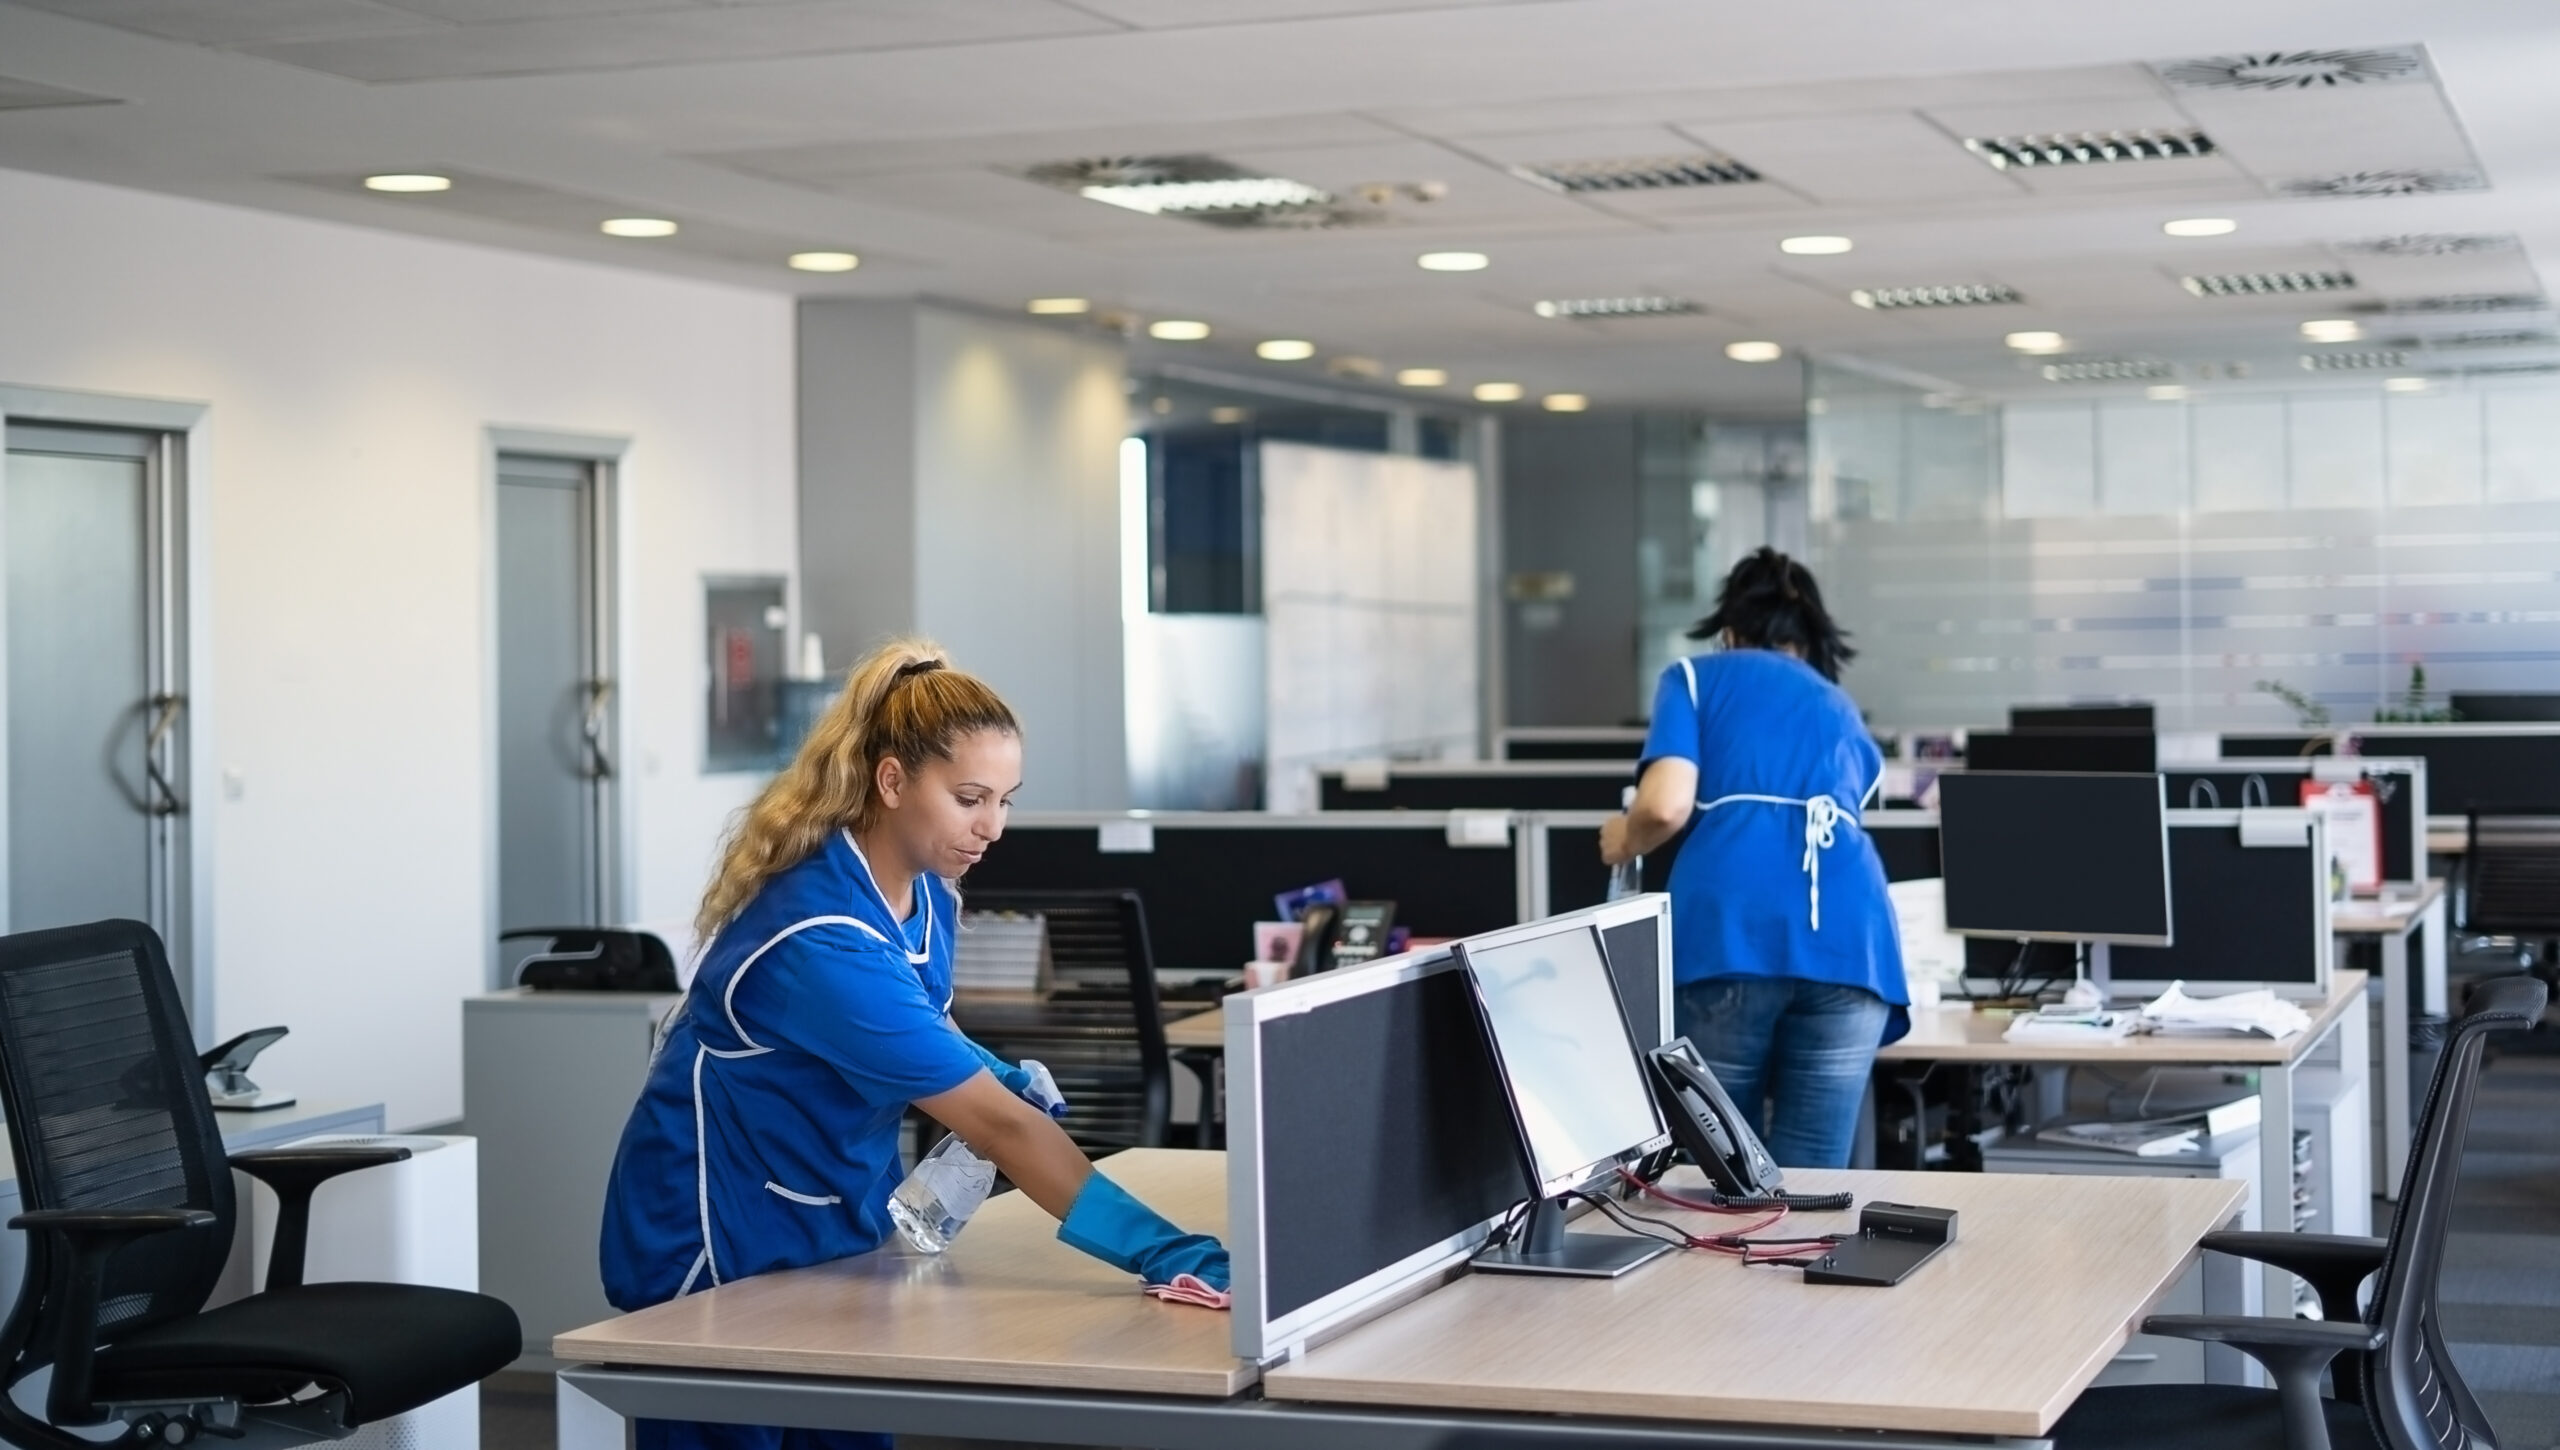 Creating Lasting Impressions: How Office Cleaners Can Win Over Facility Managers